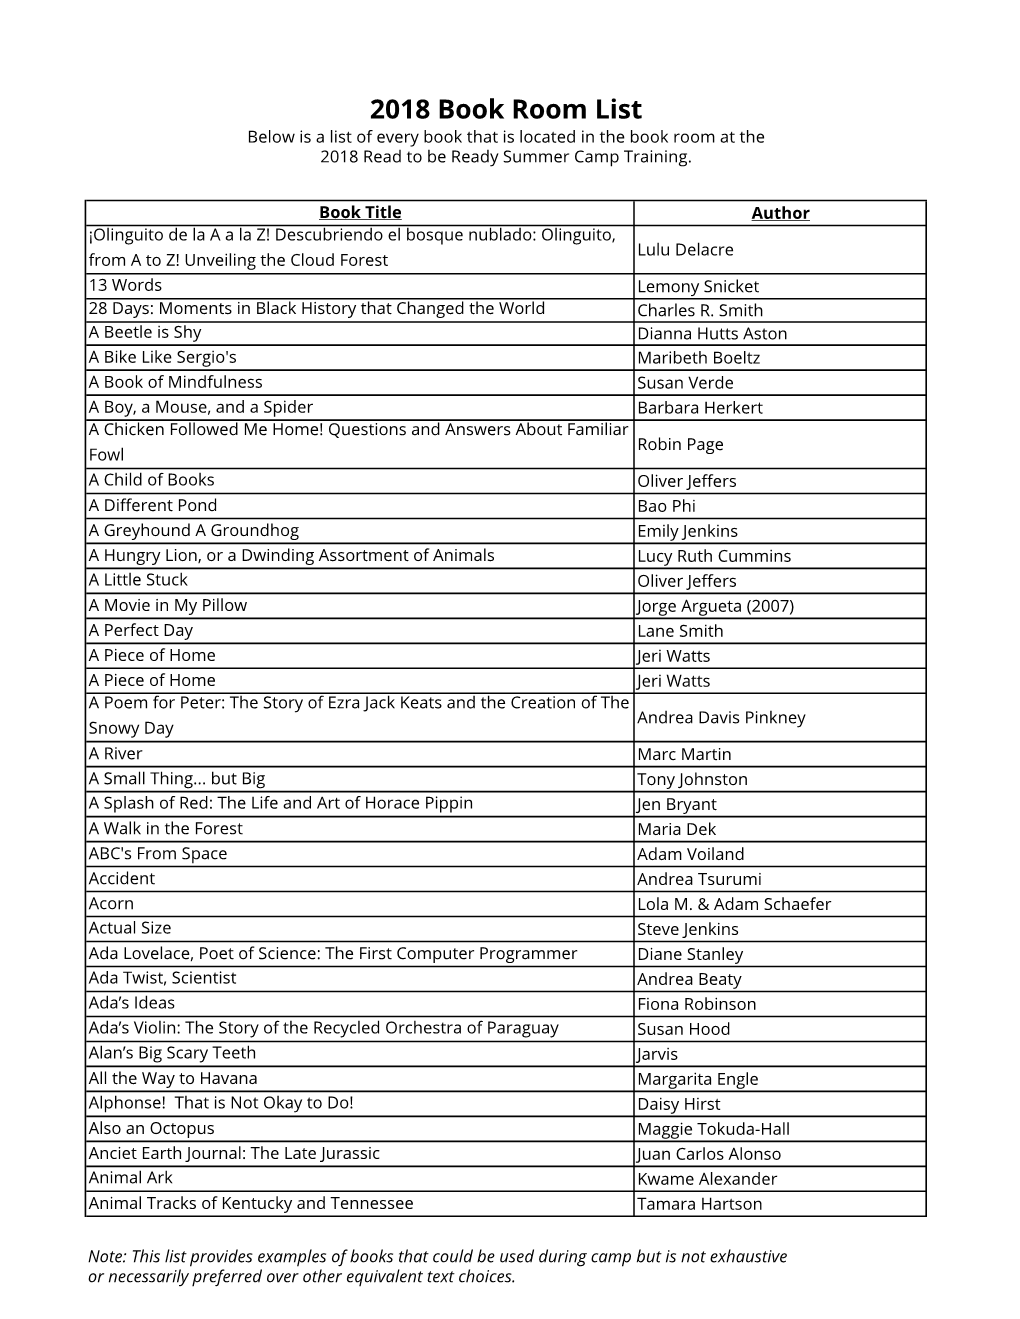 2018 Book Room List Below Is a List of Every Book That Is Located in the Book Room at the 2018 Read to Be Ready Summer Camp Training